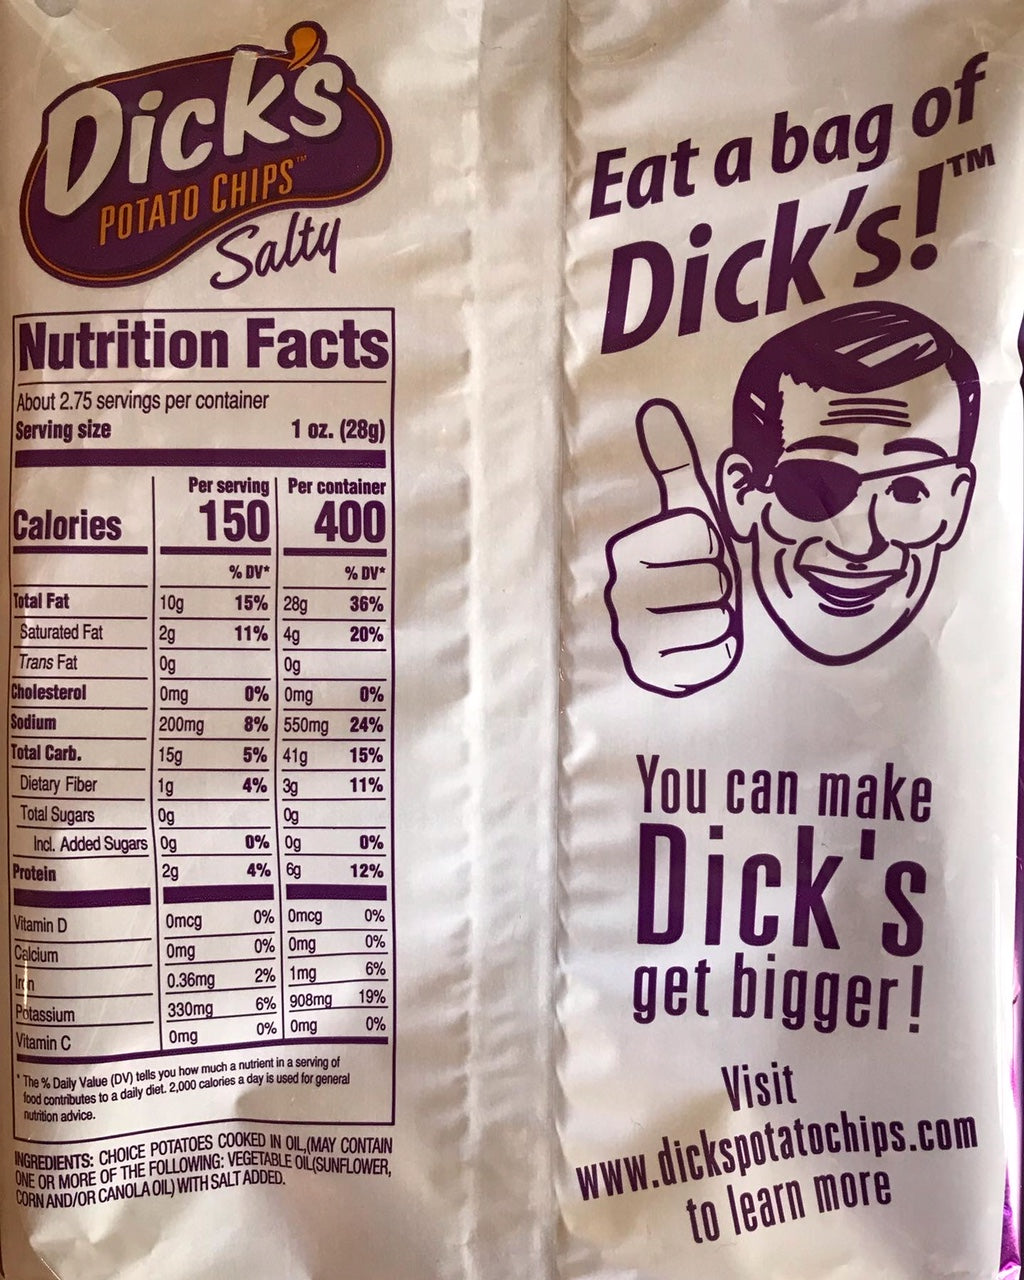 coco colvin share lays bag of dicks photos